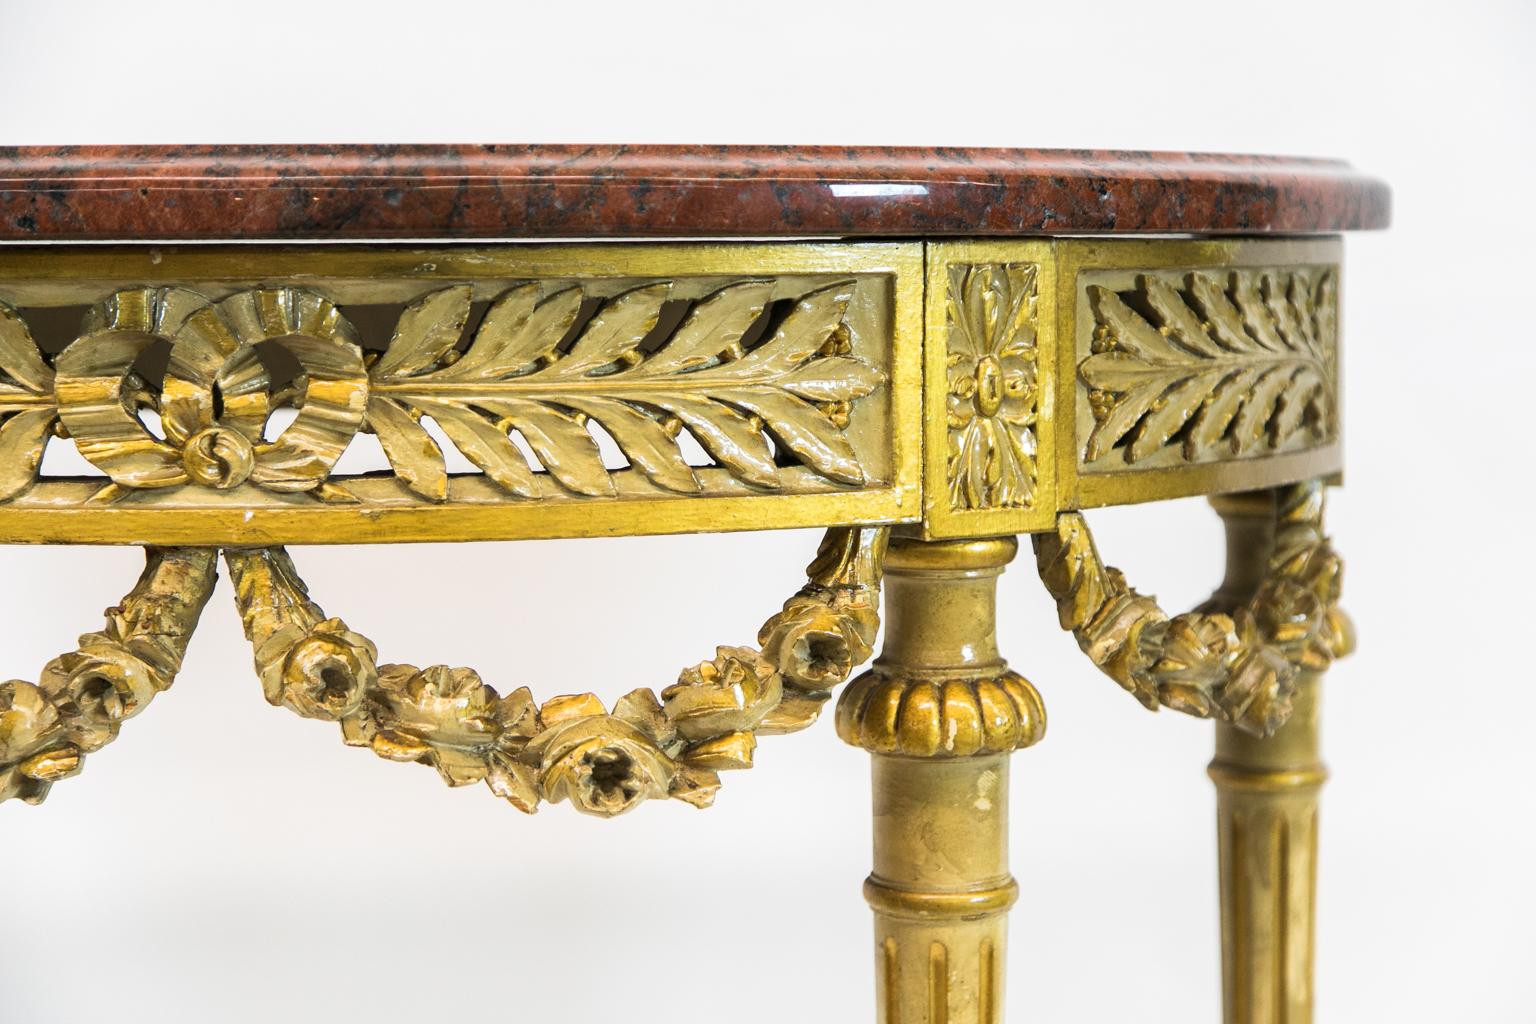 Carved demilune marble top console table is painted in gilt with reticulated ribbon and leaf carving. It has carved floral swags beneath the apron with fluted tapering legs with carved acanthus leaves at the base. There are carved leaf supports for